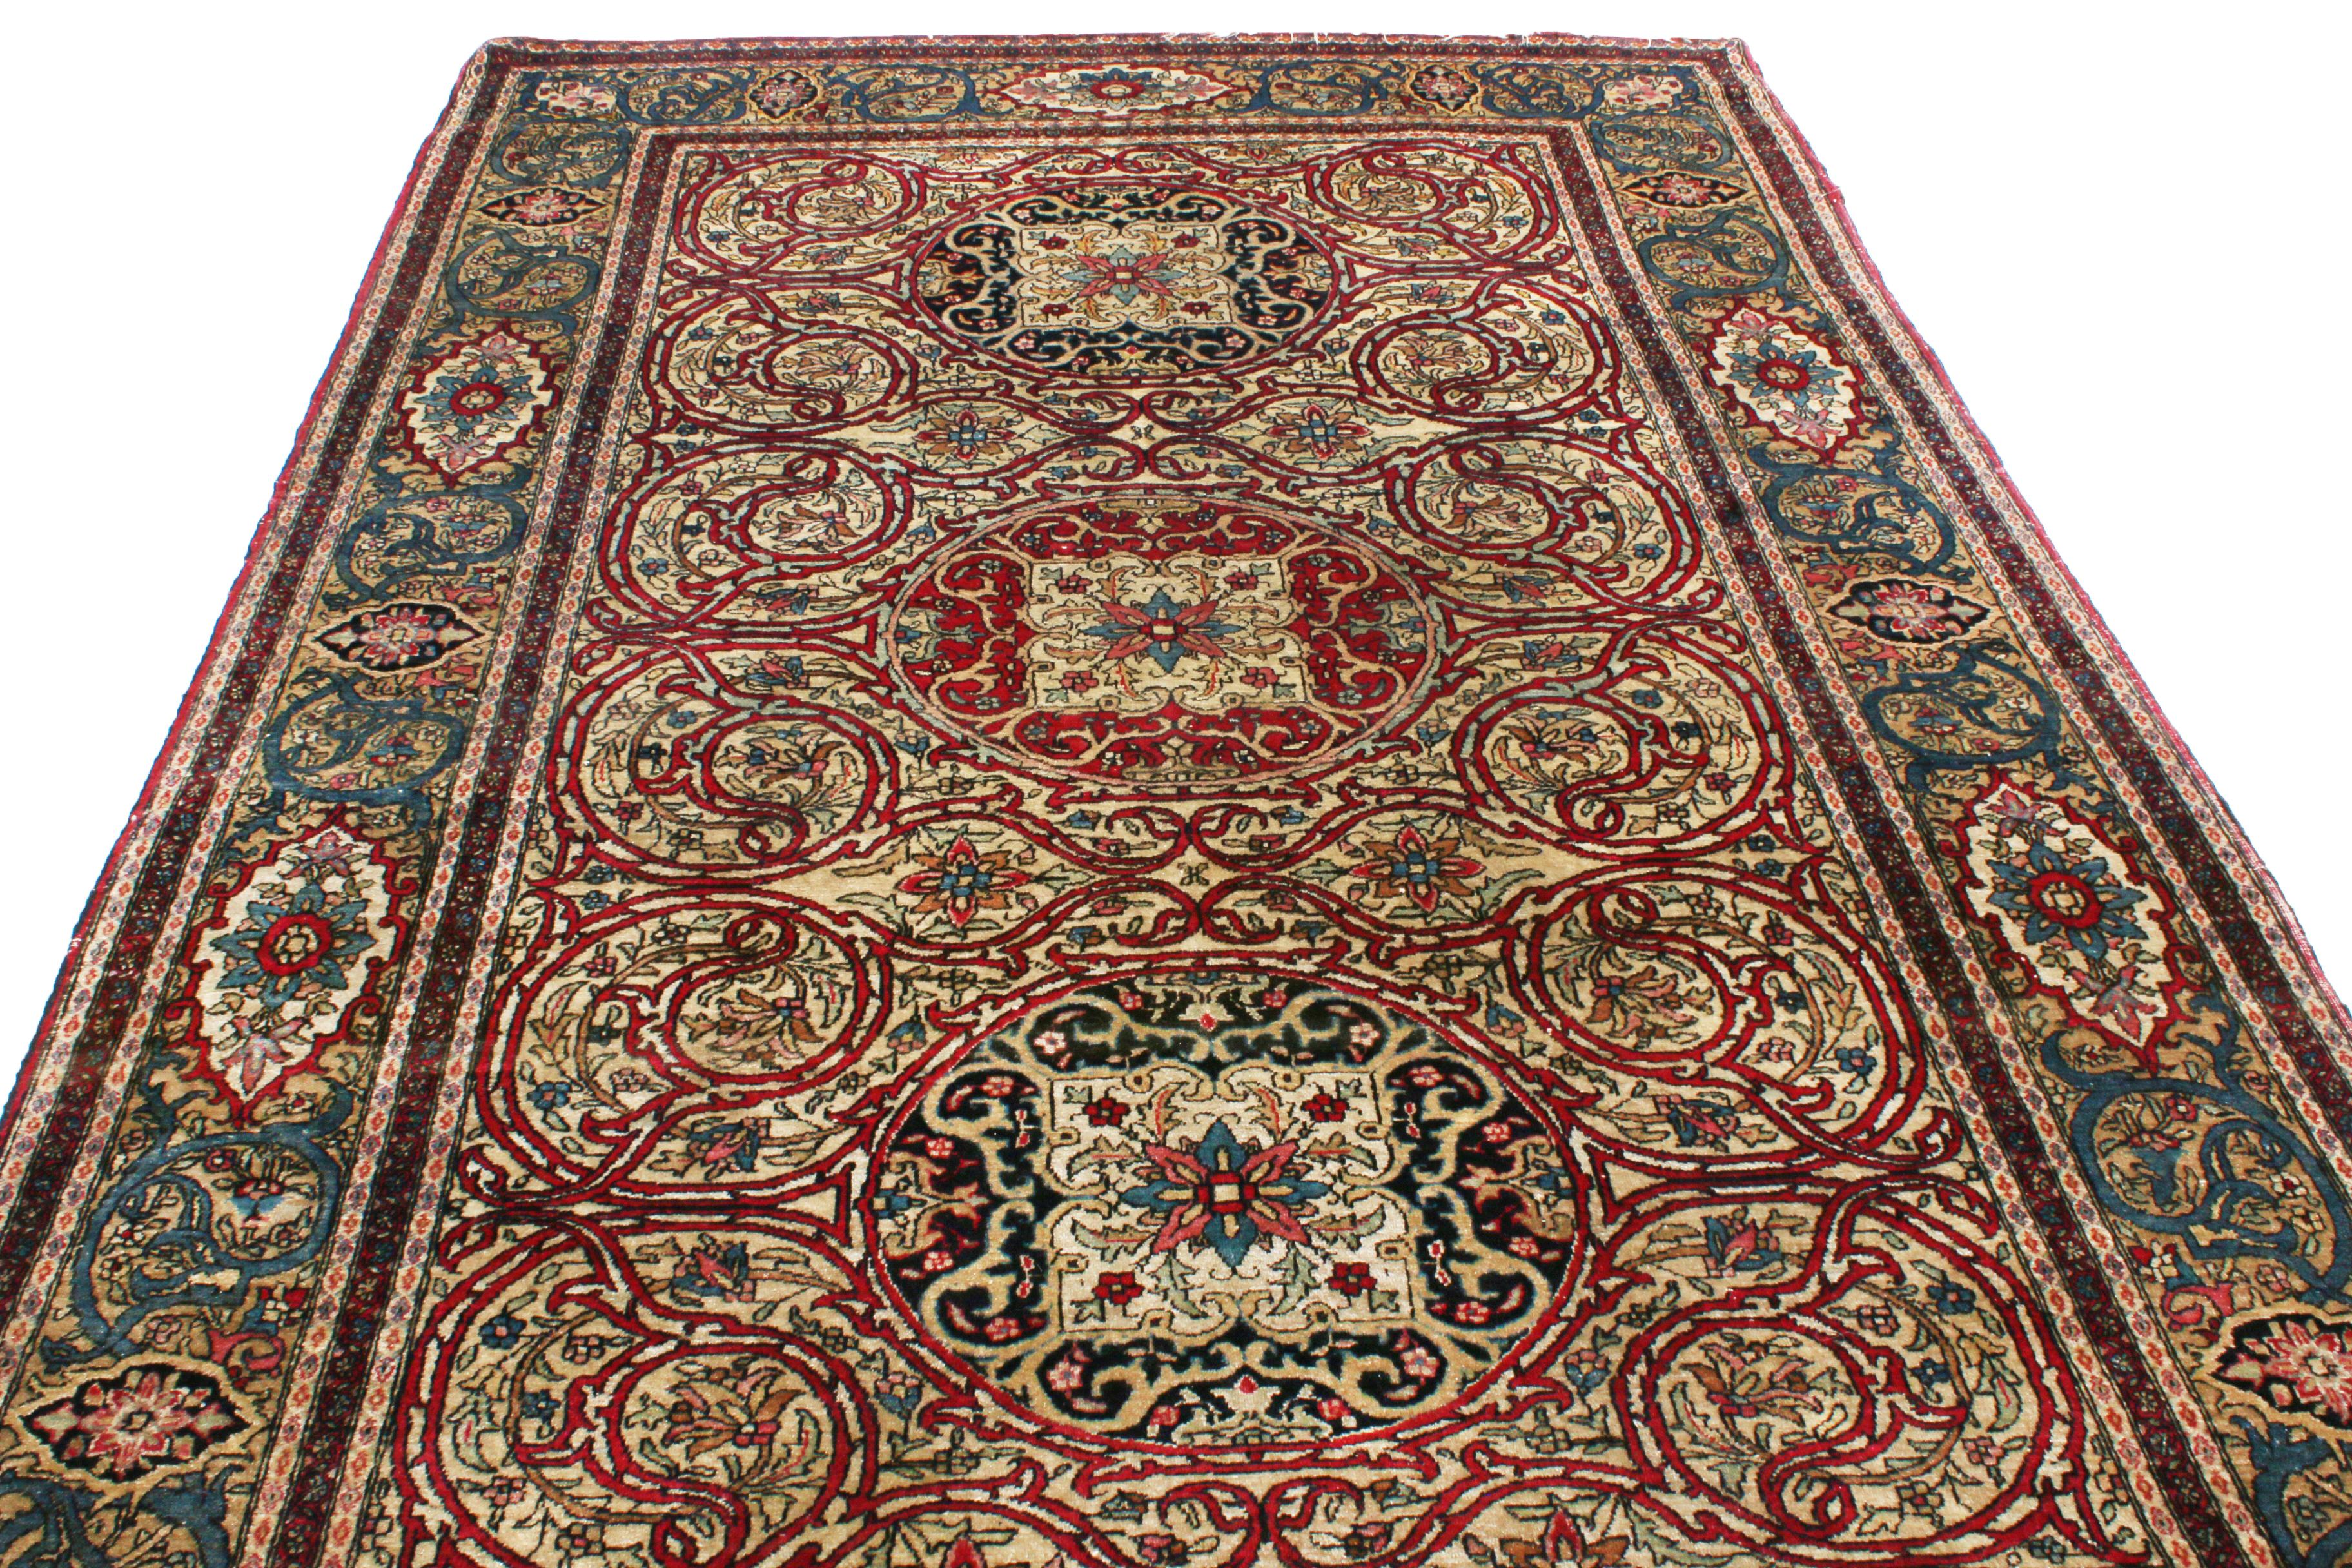 Hand-Knotted Antique Isfahan Red and Golden Beige Wool Persian Rug Floral Pattern